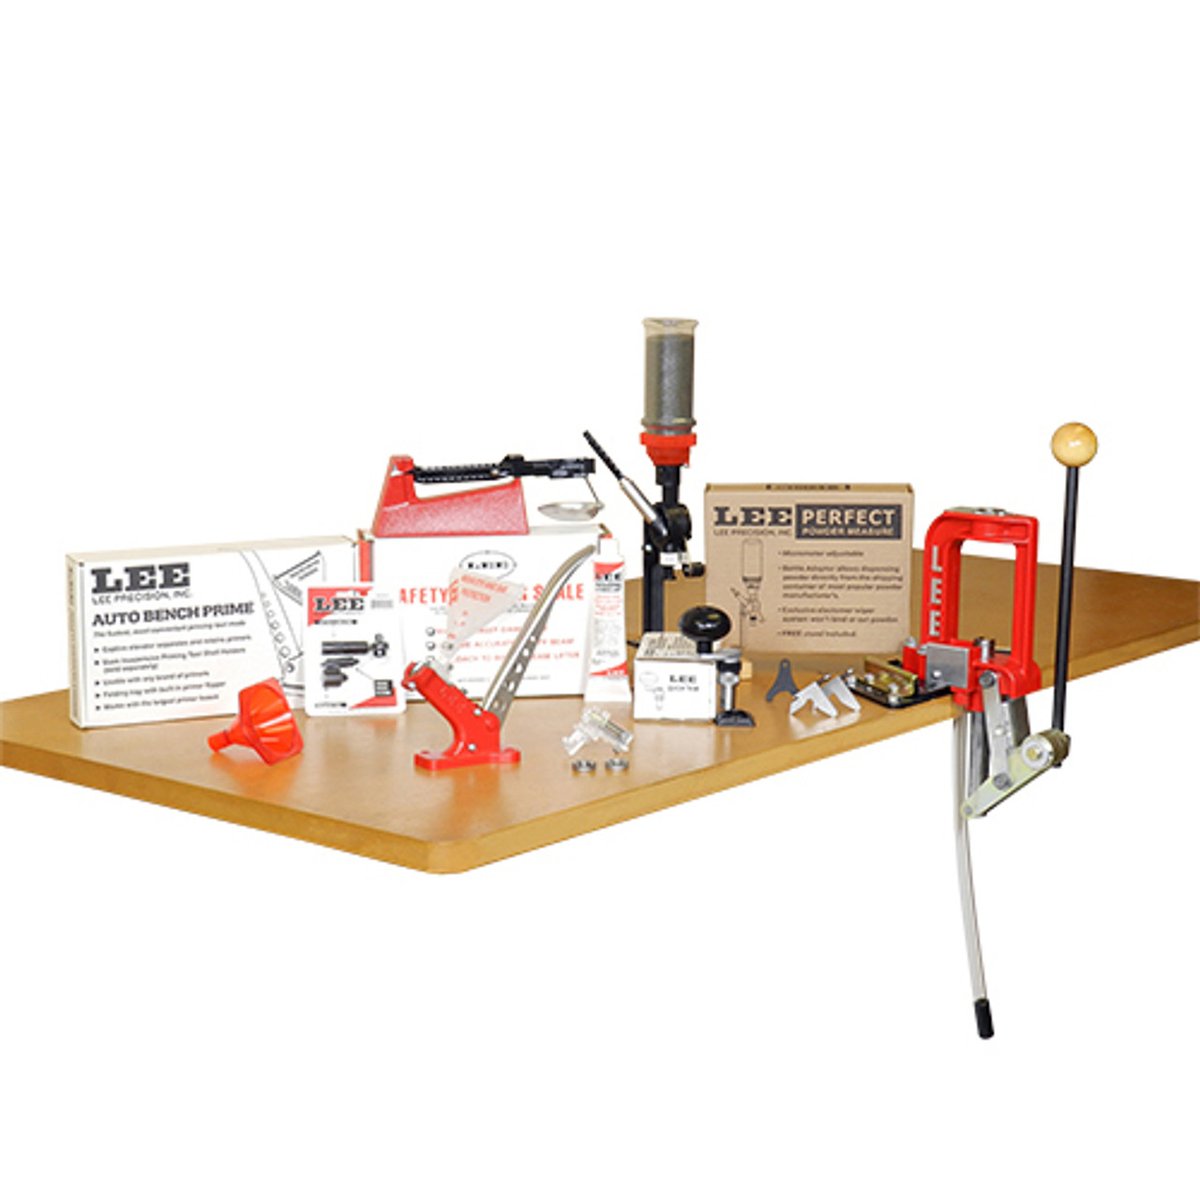 The Lee Bench Prime Press Kit includes Lee's Auto Bench Prime and three of the most popular shell holders for widely-used cartridges. 

Follow this link for details: theammosource.com/lee-bench-prim…

#Reloading #AmmunitionReload #Handloading #ReloadingLife #ReloadedAmmo